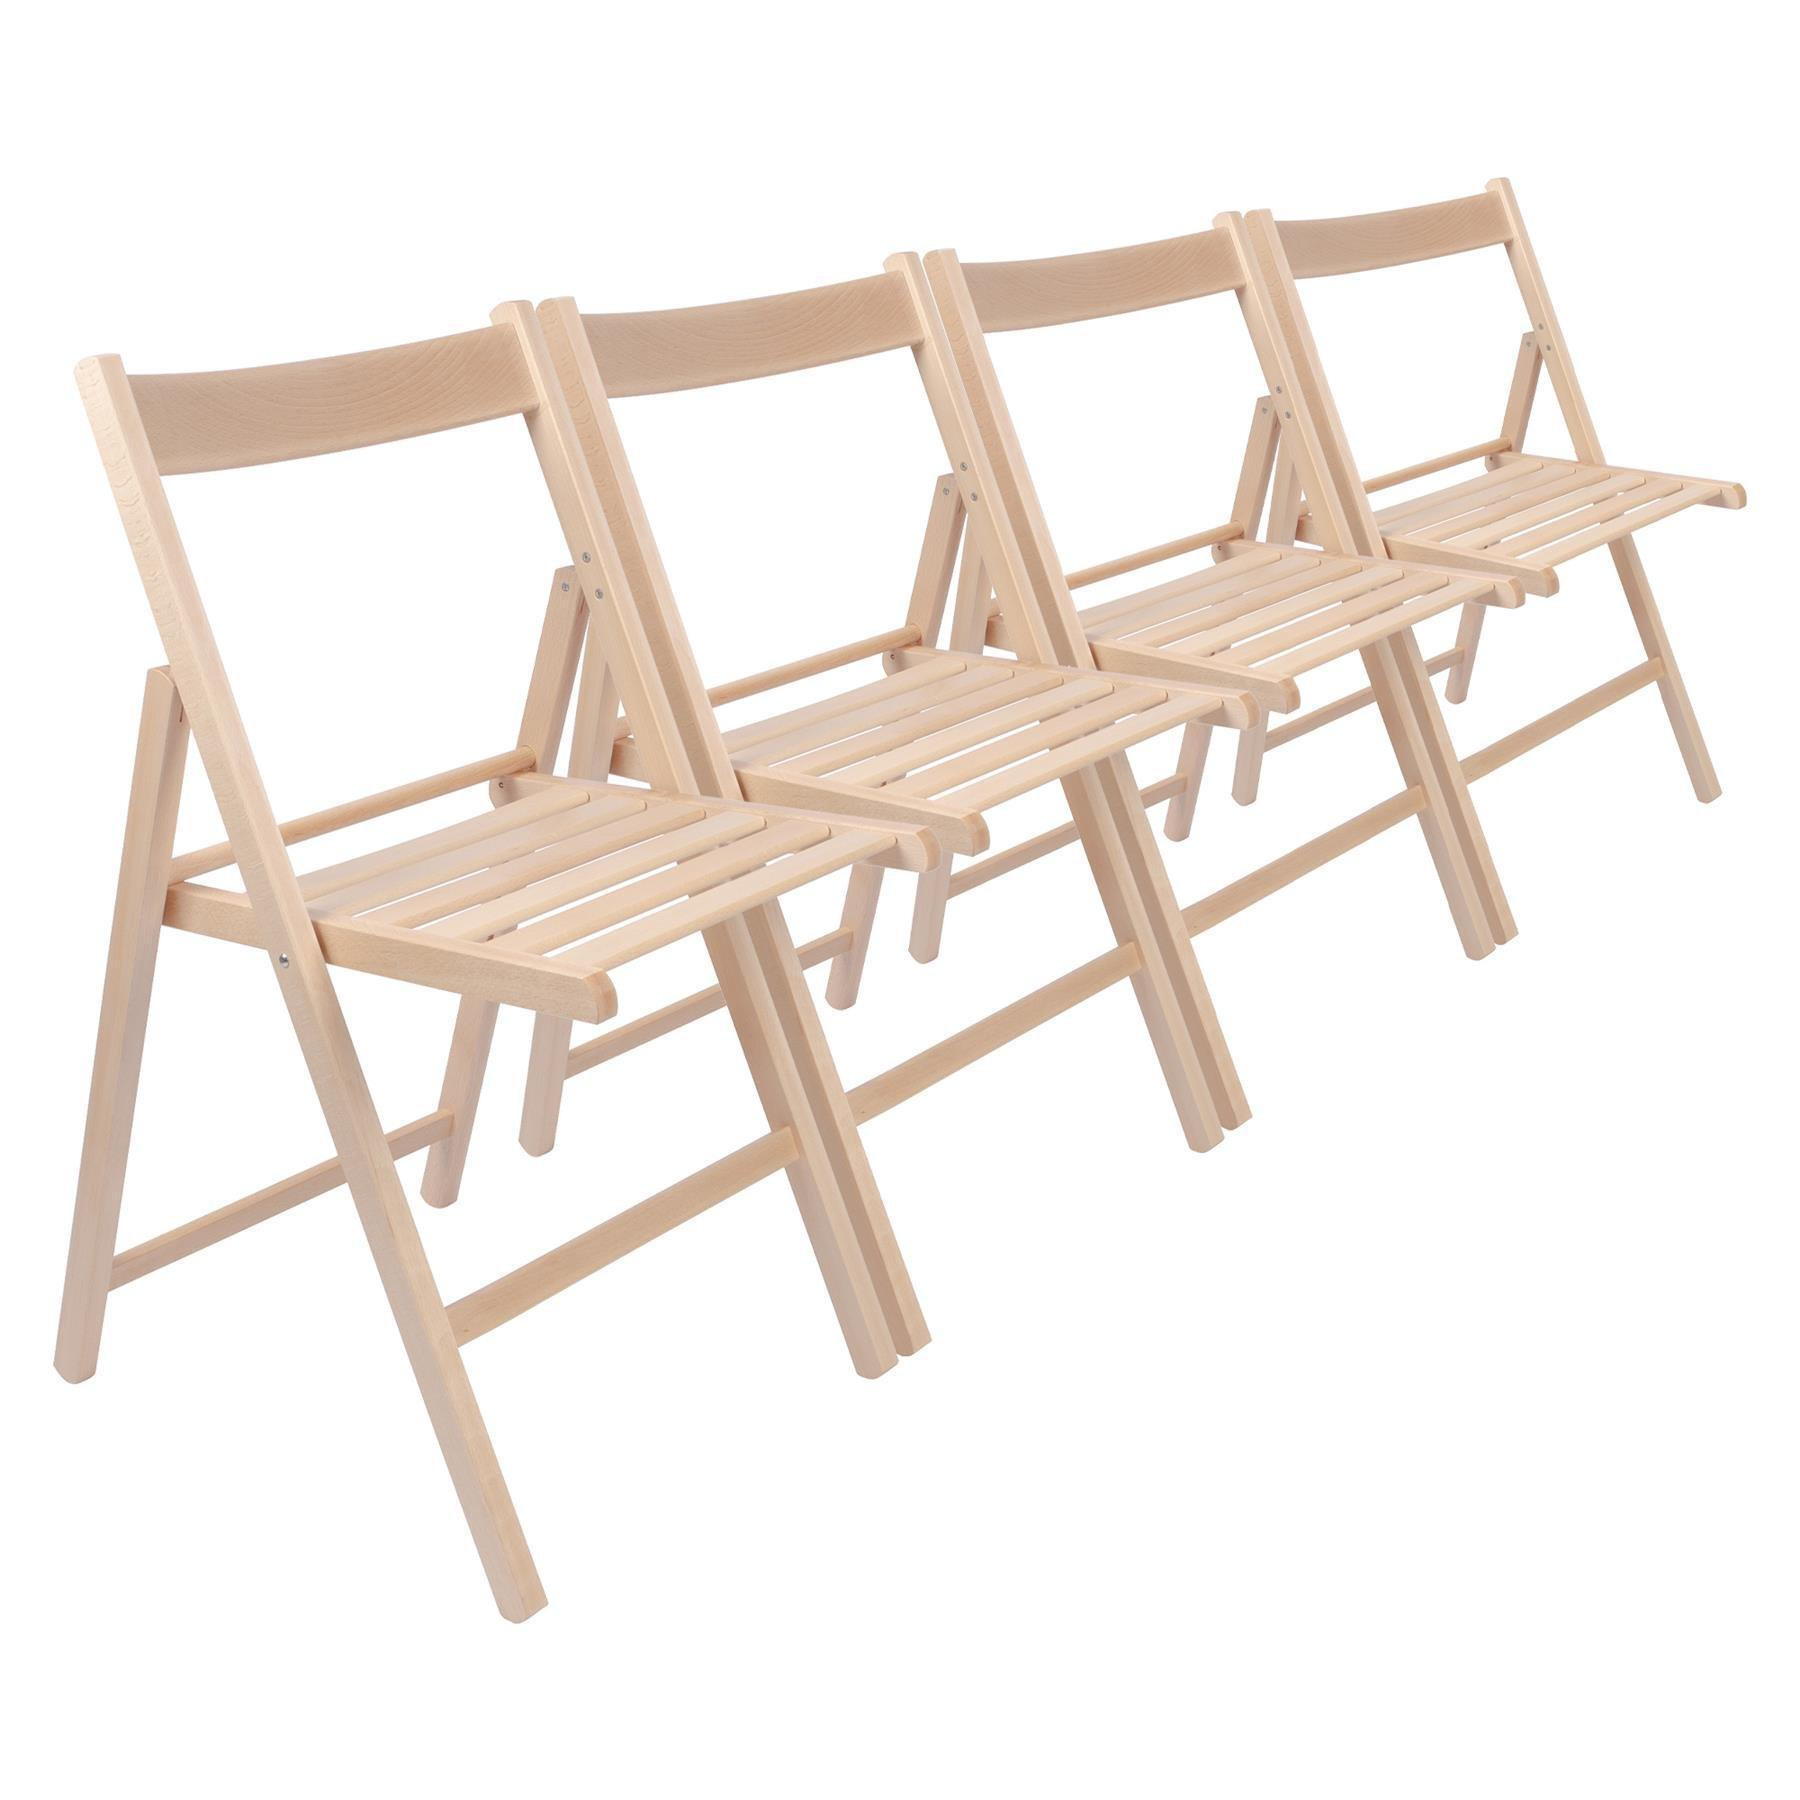 Beech Wood Folding Chairs Pack of 4 - image 1